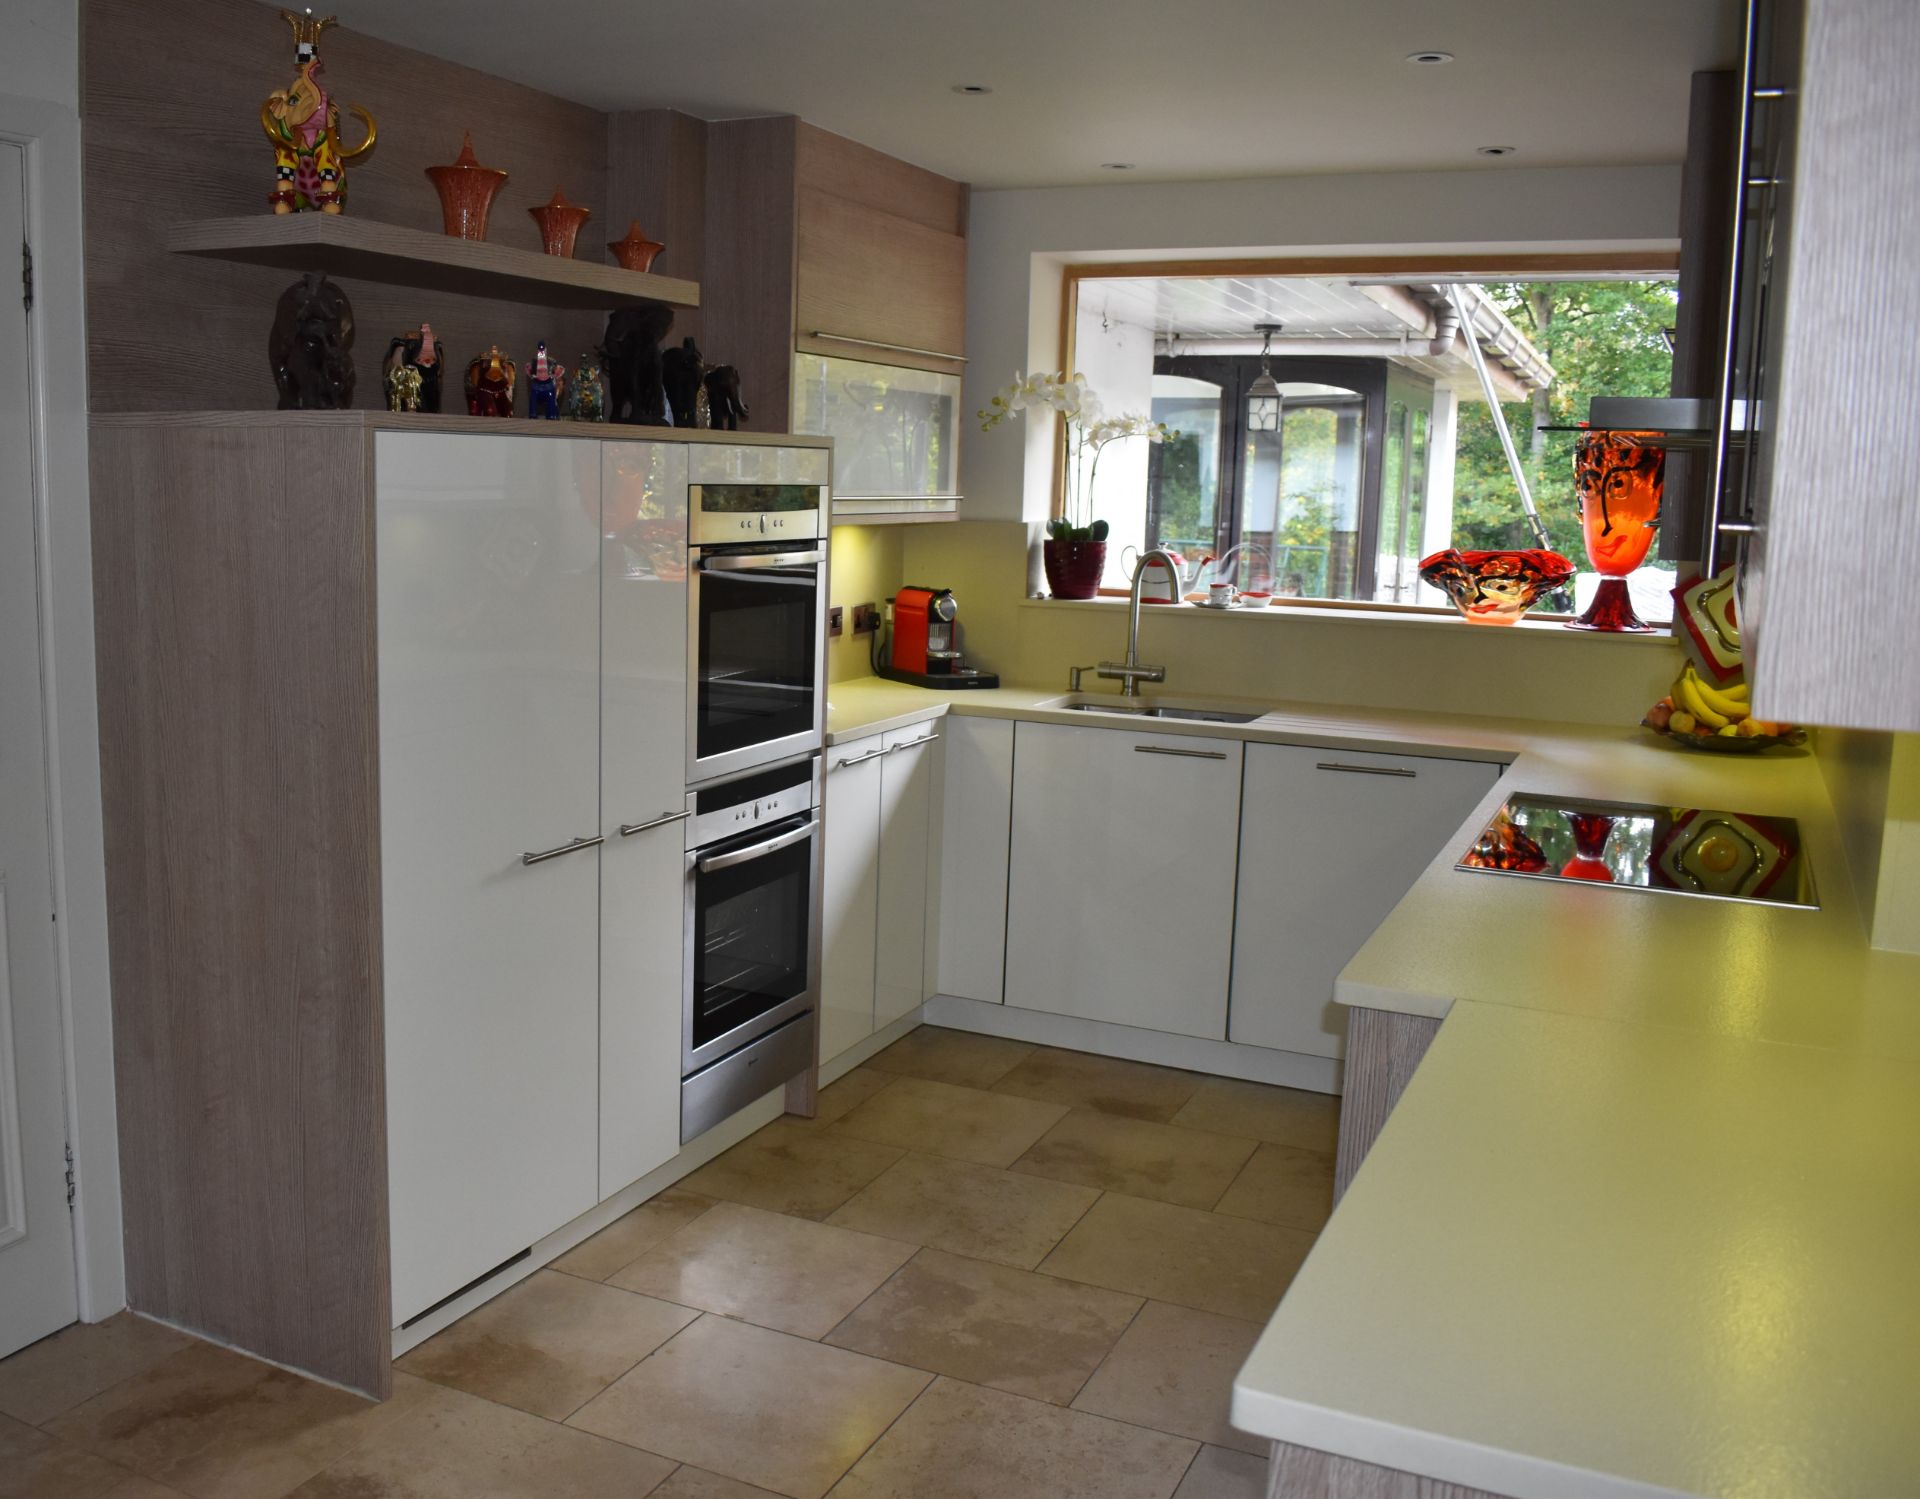 1 x Pronorm Einbauküchen German Made Fitted Kitchen With Contemporary High Gloss Cream Doors and - Image 39 of 50